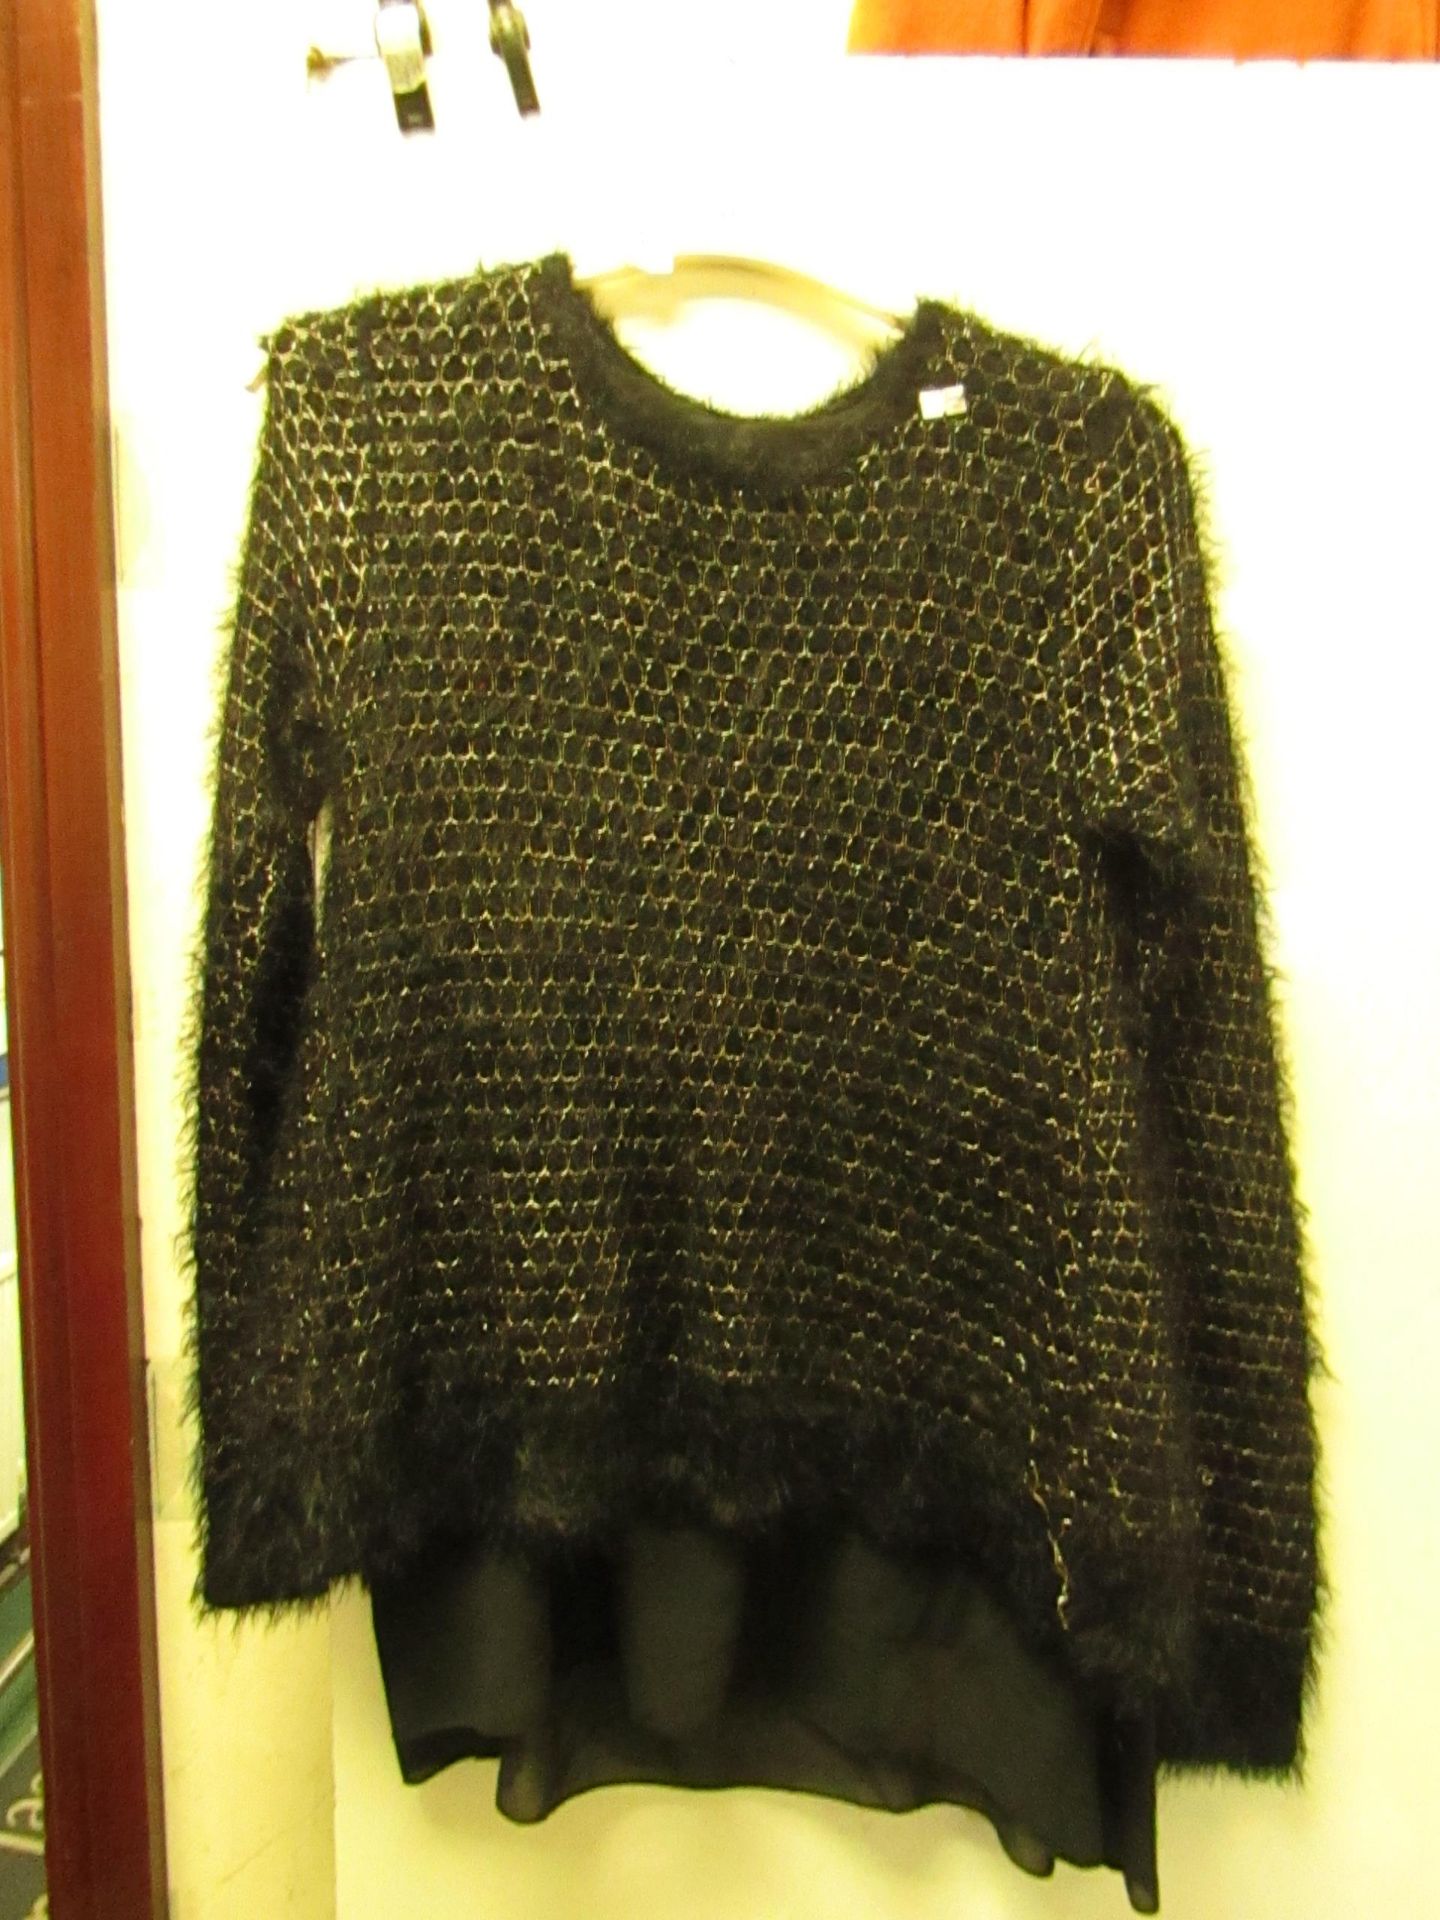 1 x Black Ladies Top size approx 12 (has small pull on side)